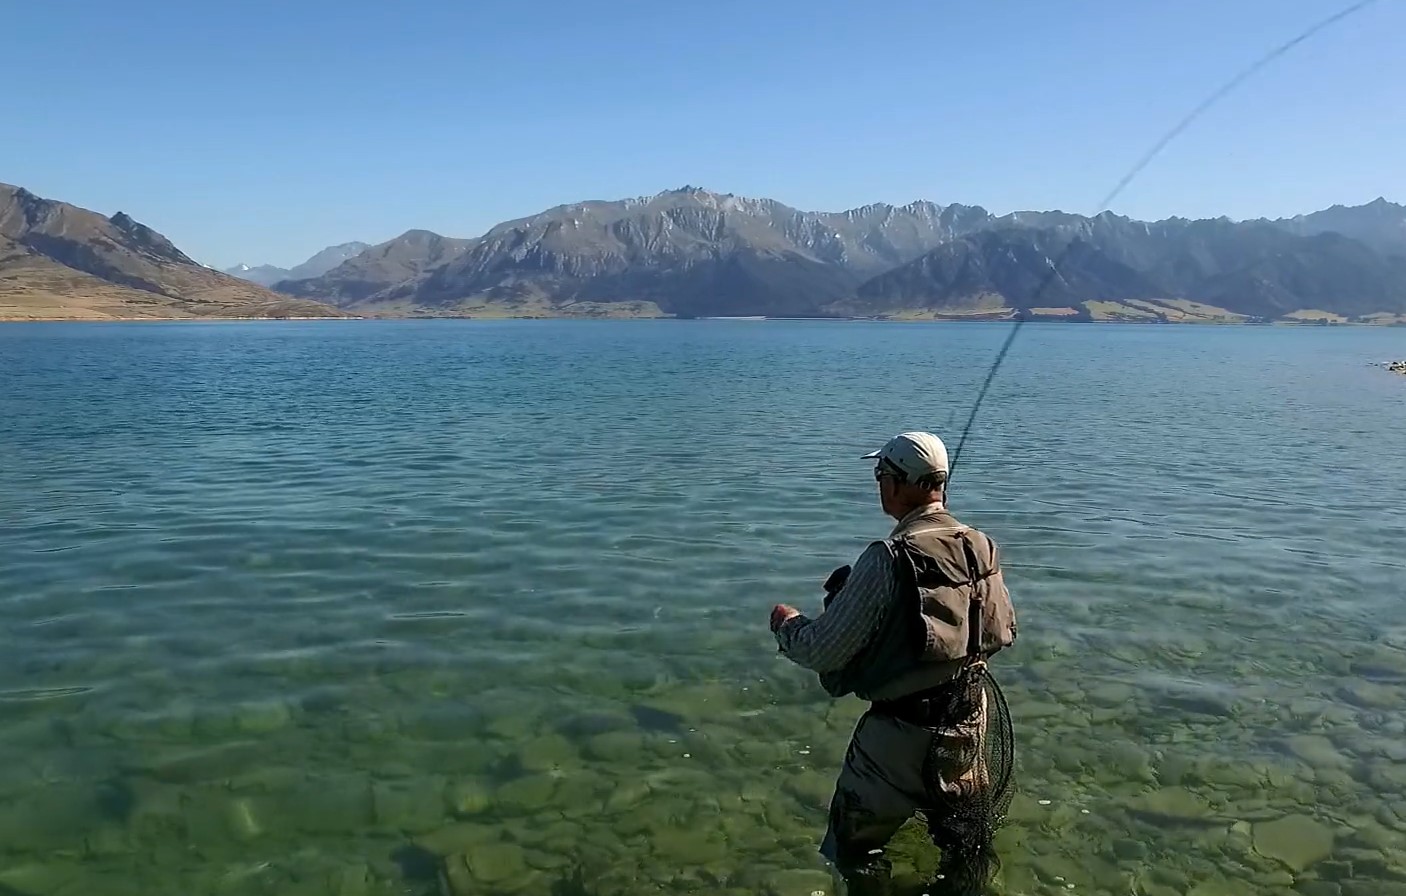 Ian Cole, A Fly Fisher’s Guide.